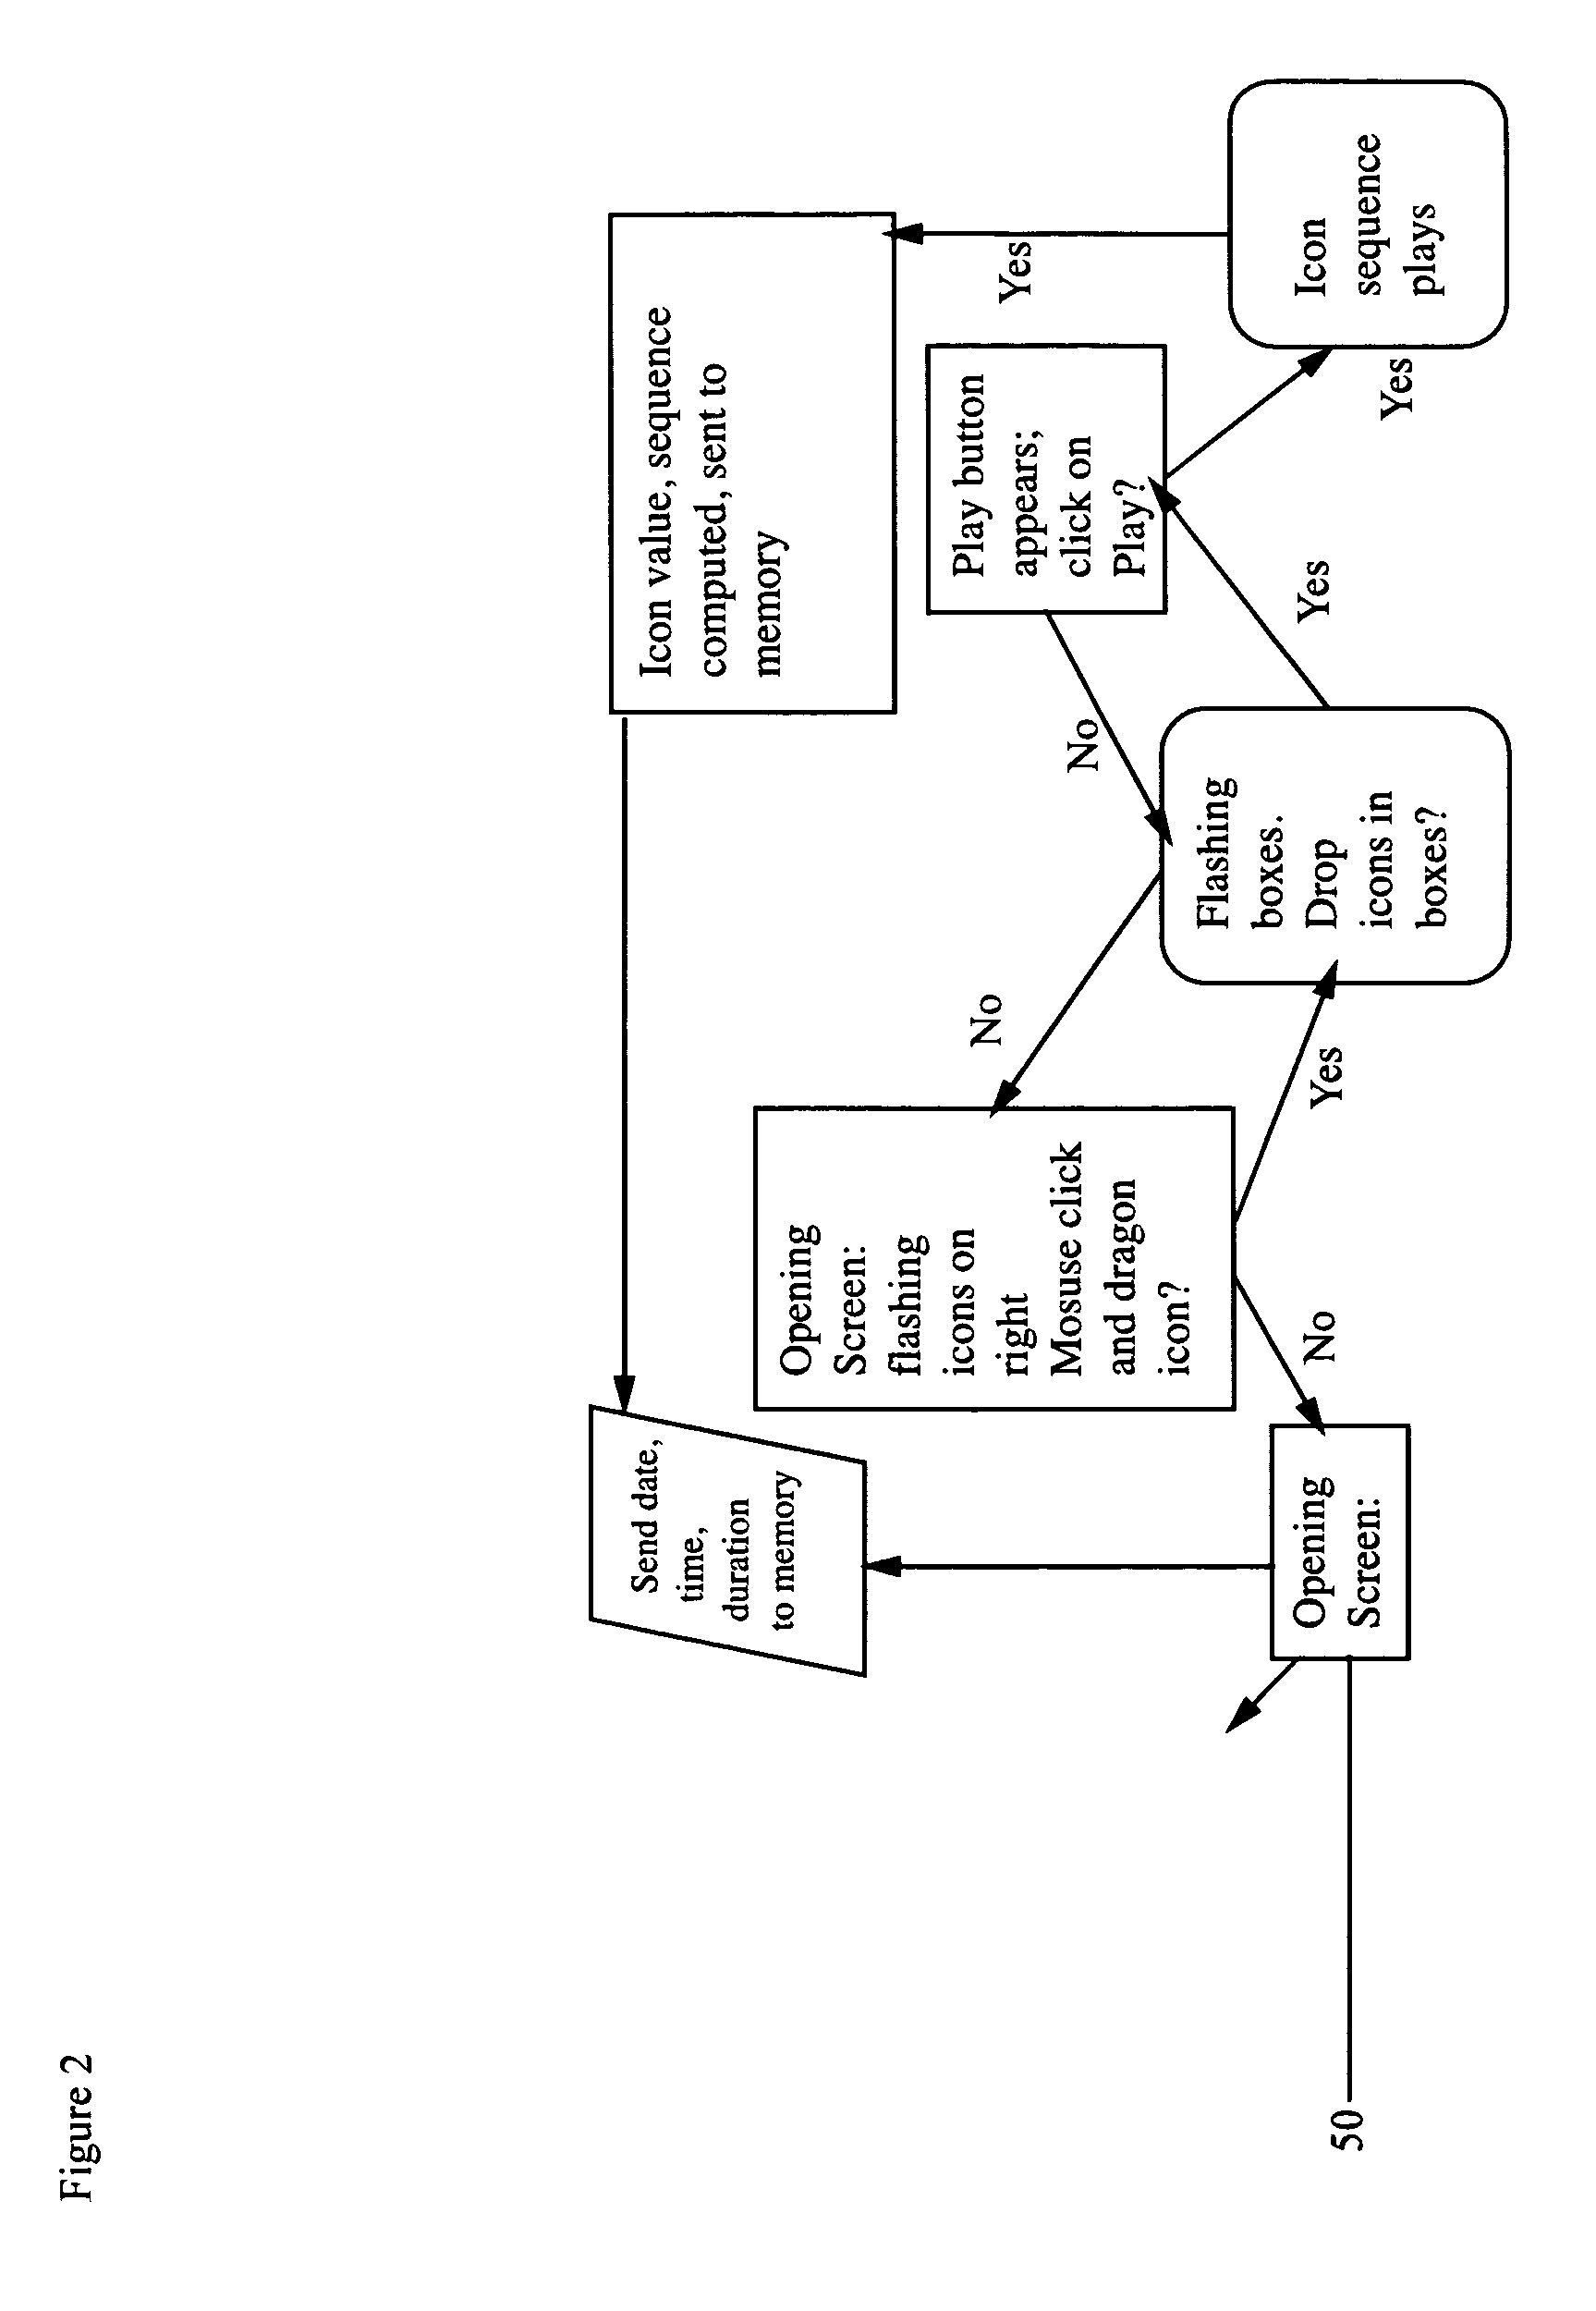 Computer-aided psychological diagnosis and treatment system